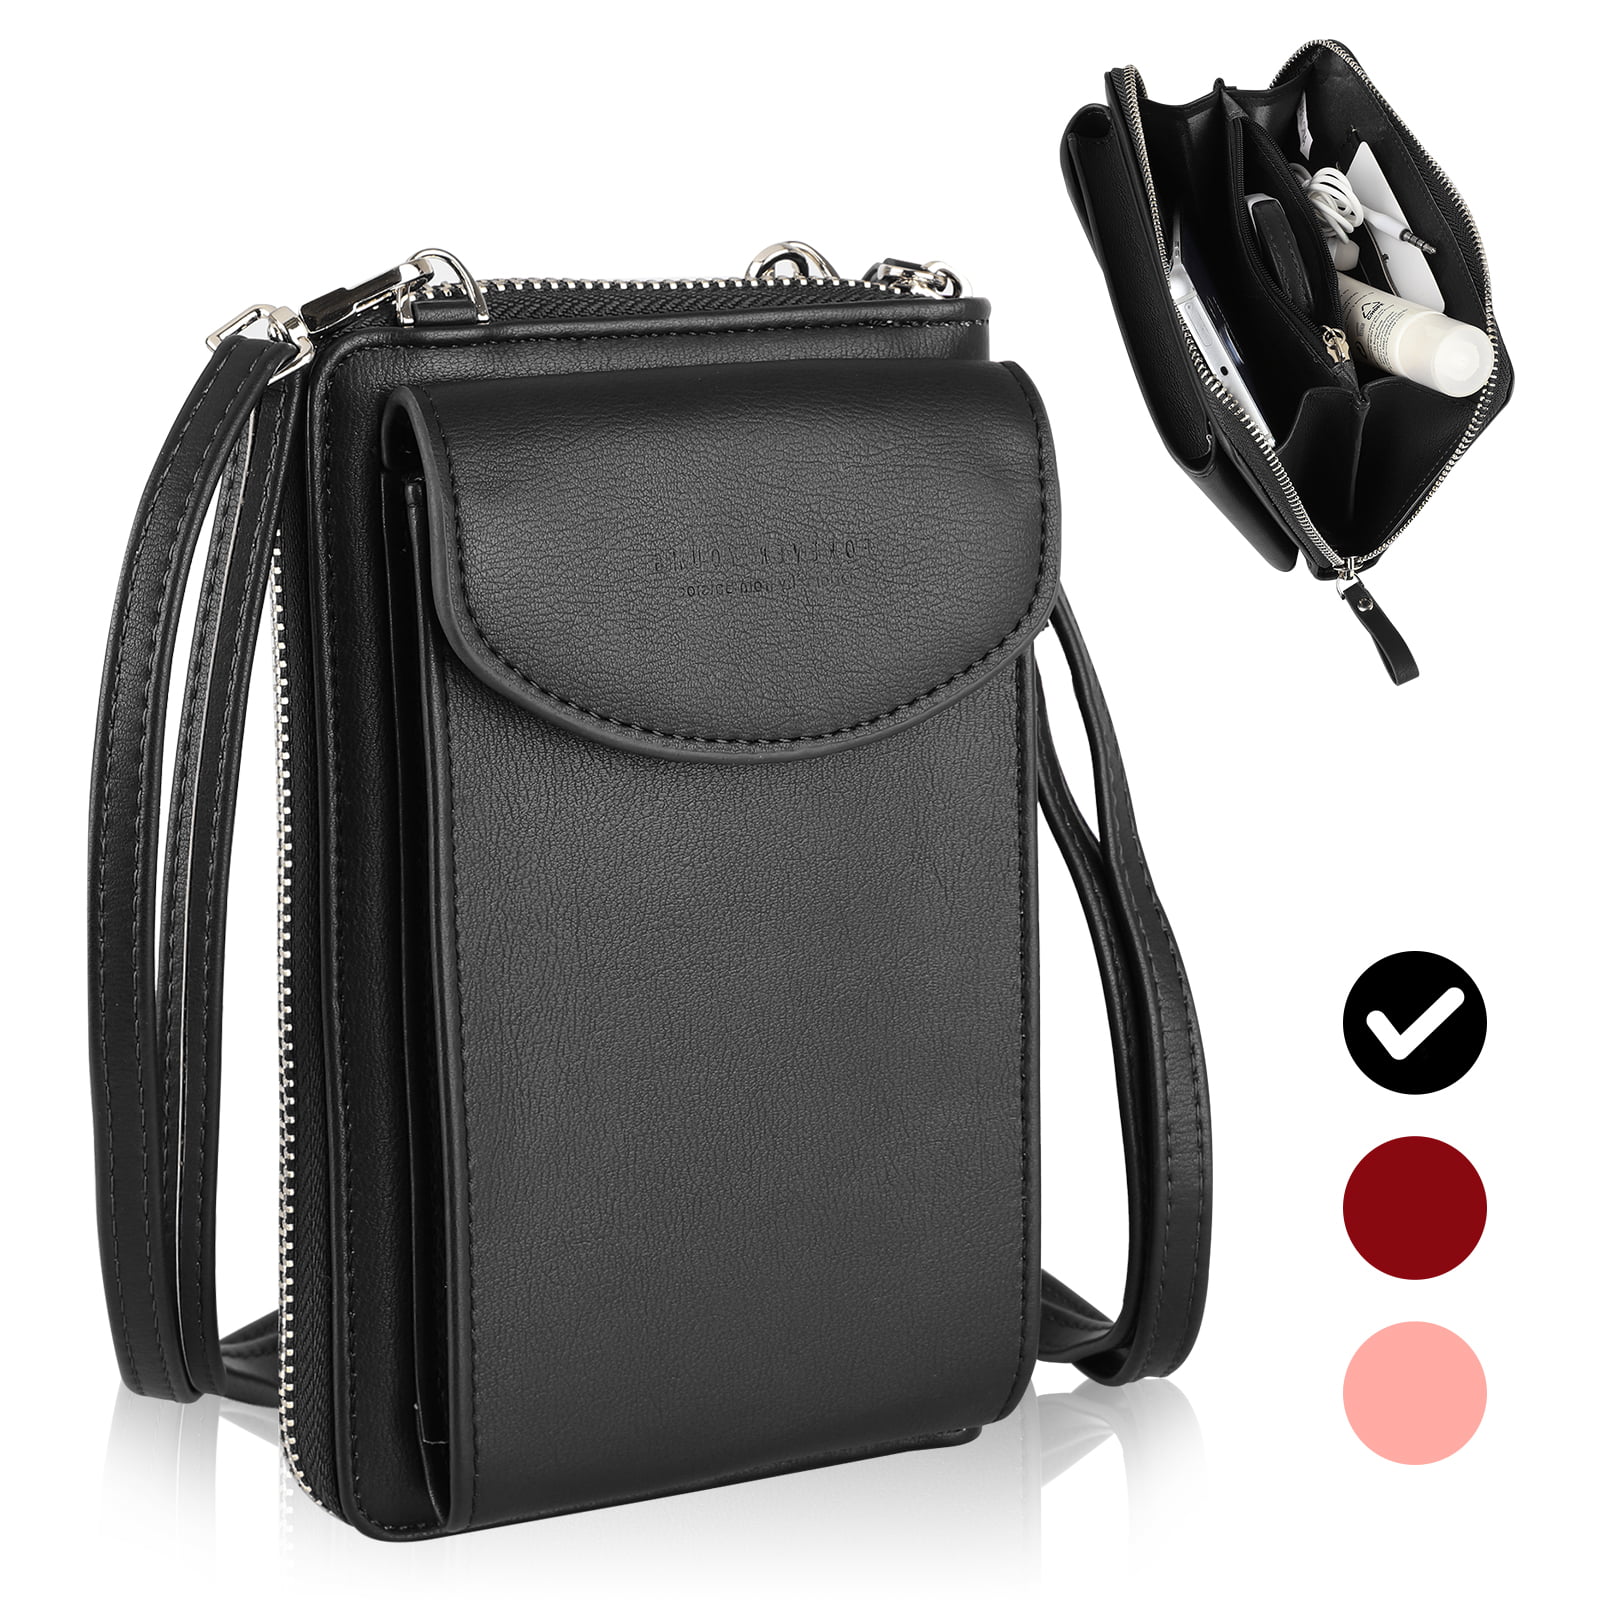 Small Leather Crossbody Cellphone Shoulder Bag Smartphone Wallet Purse for Women 